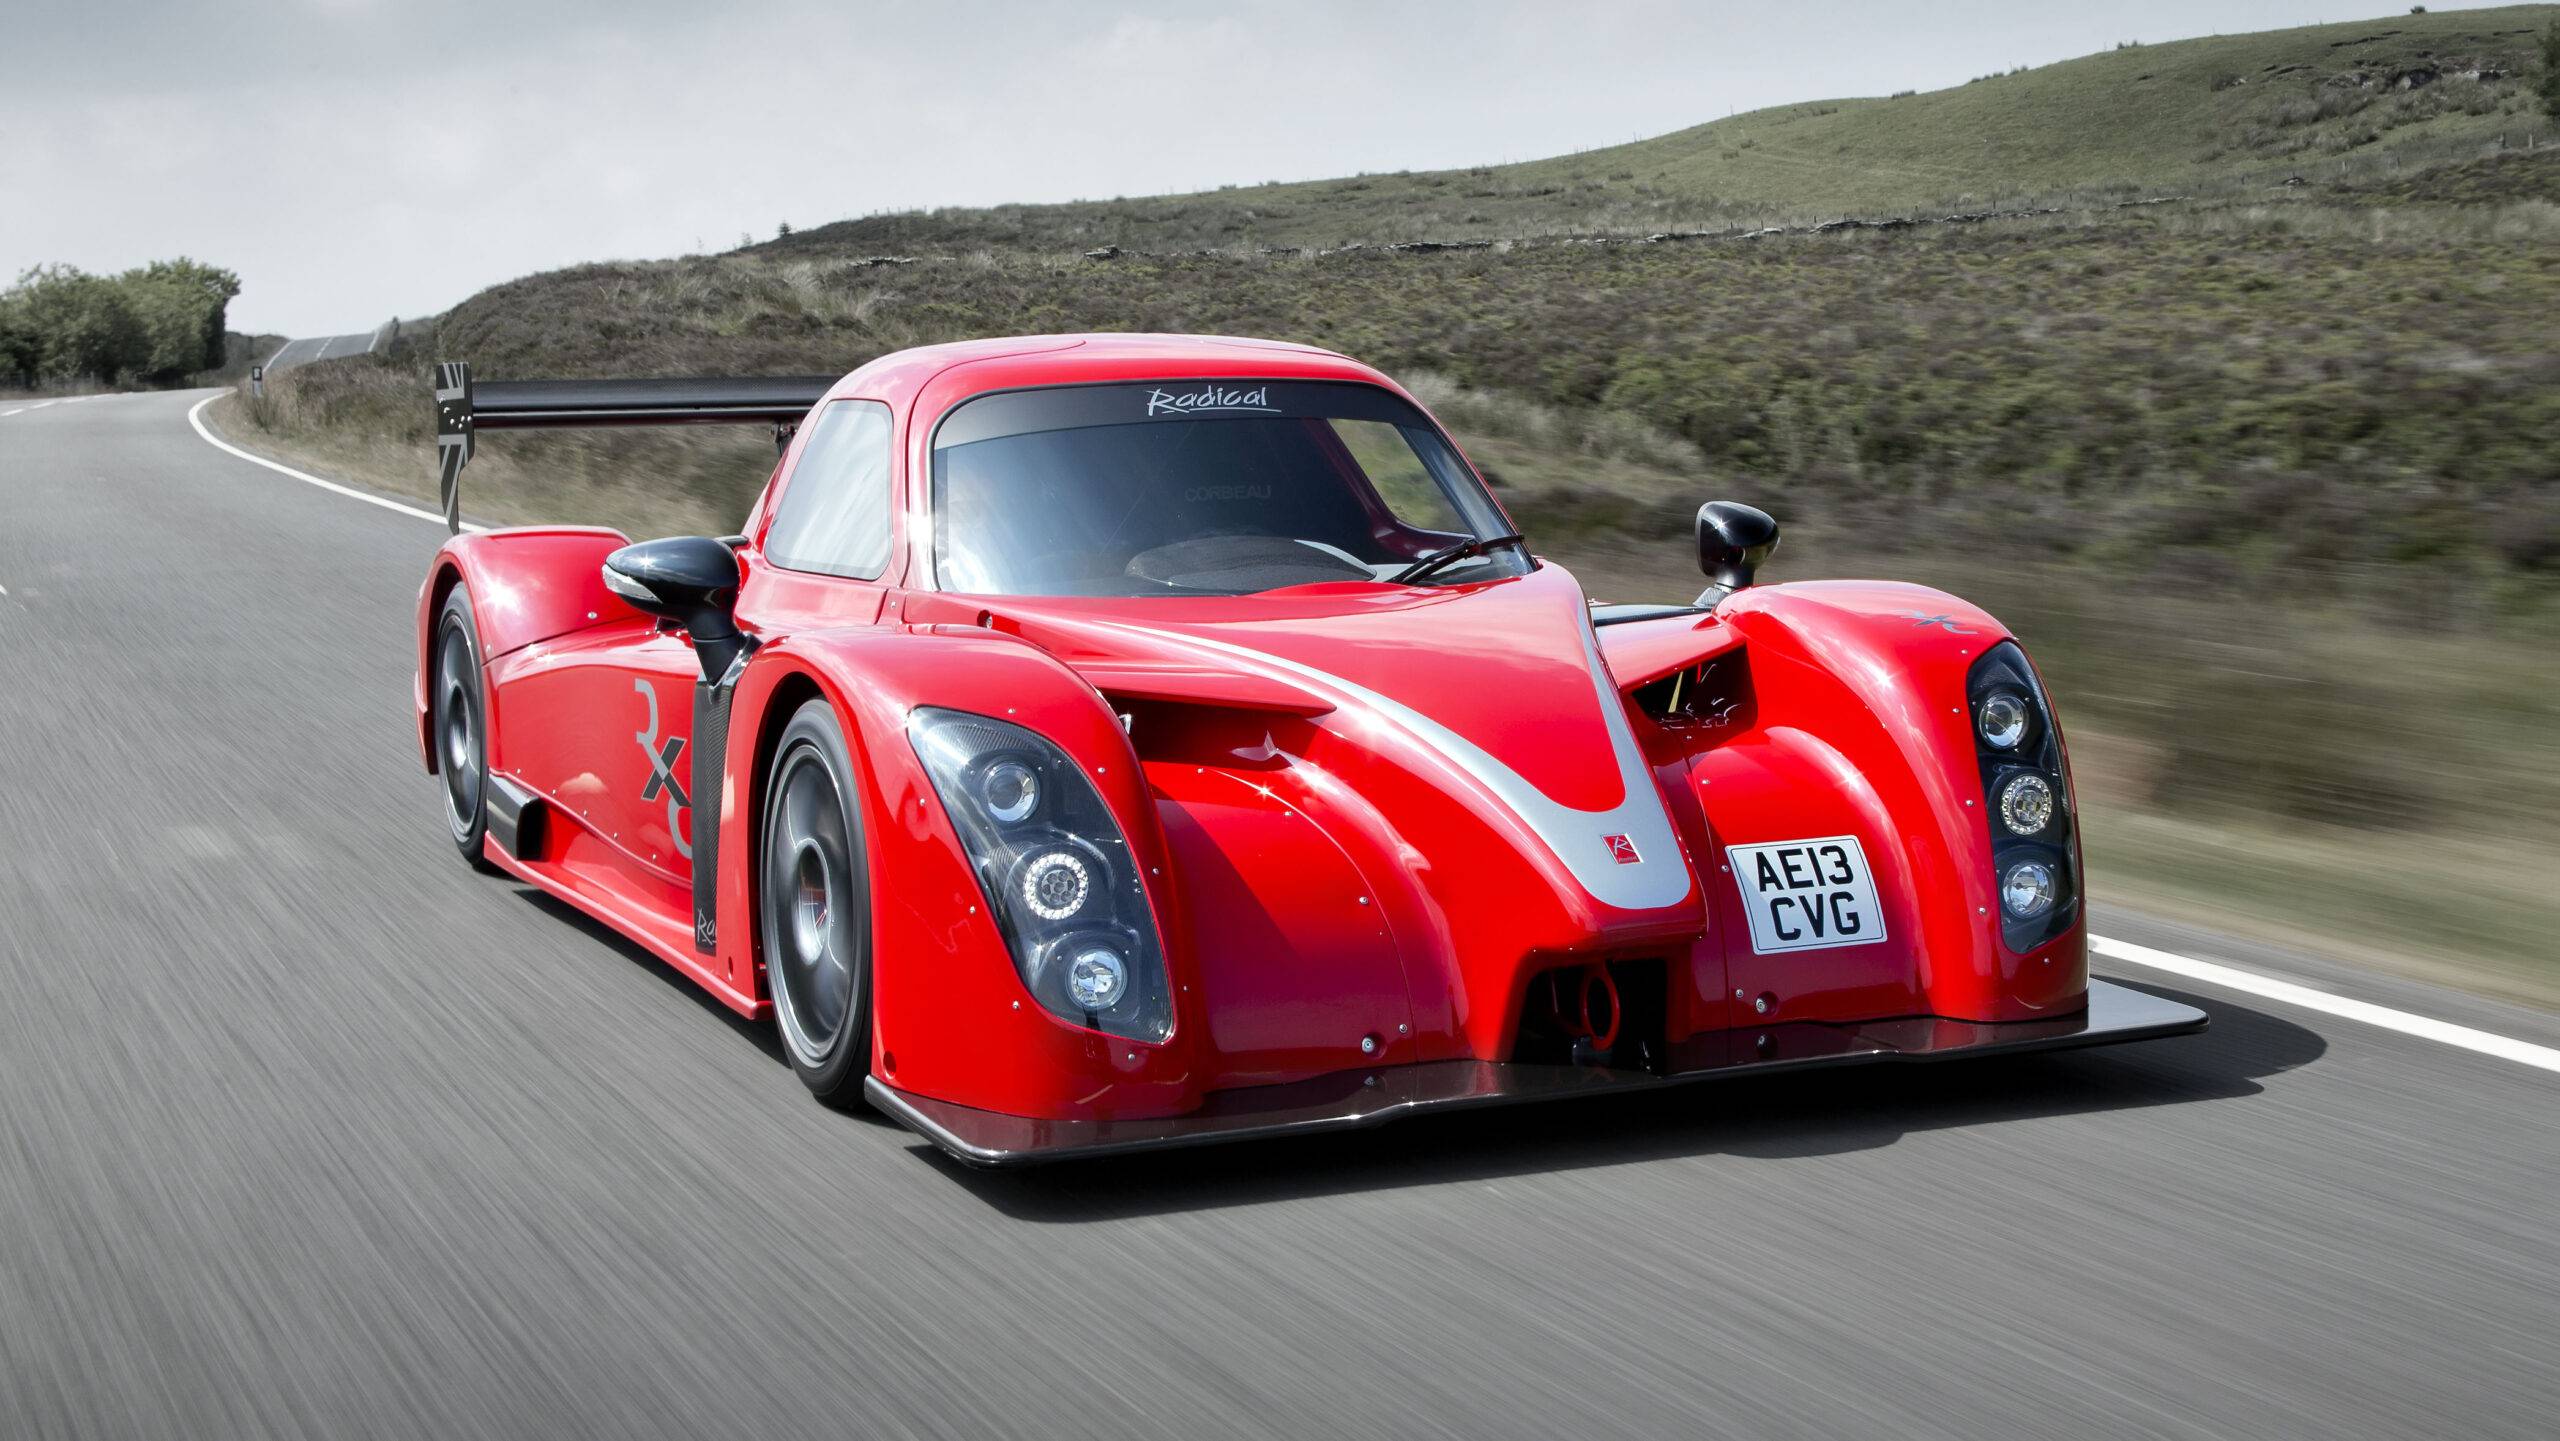 A Radical RXC GT in red driving on a road.